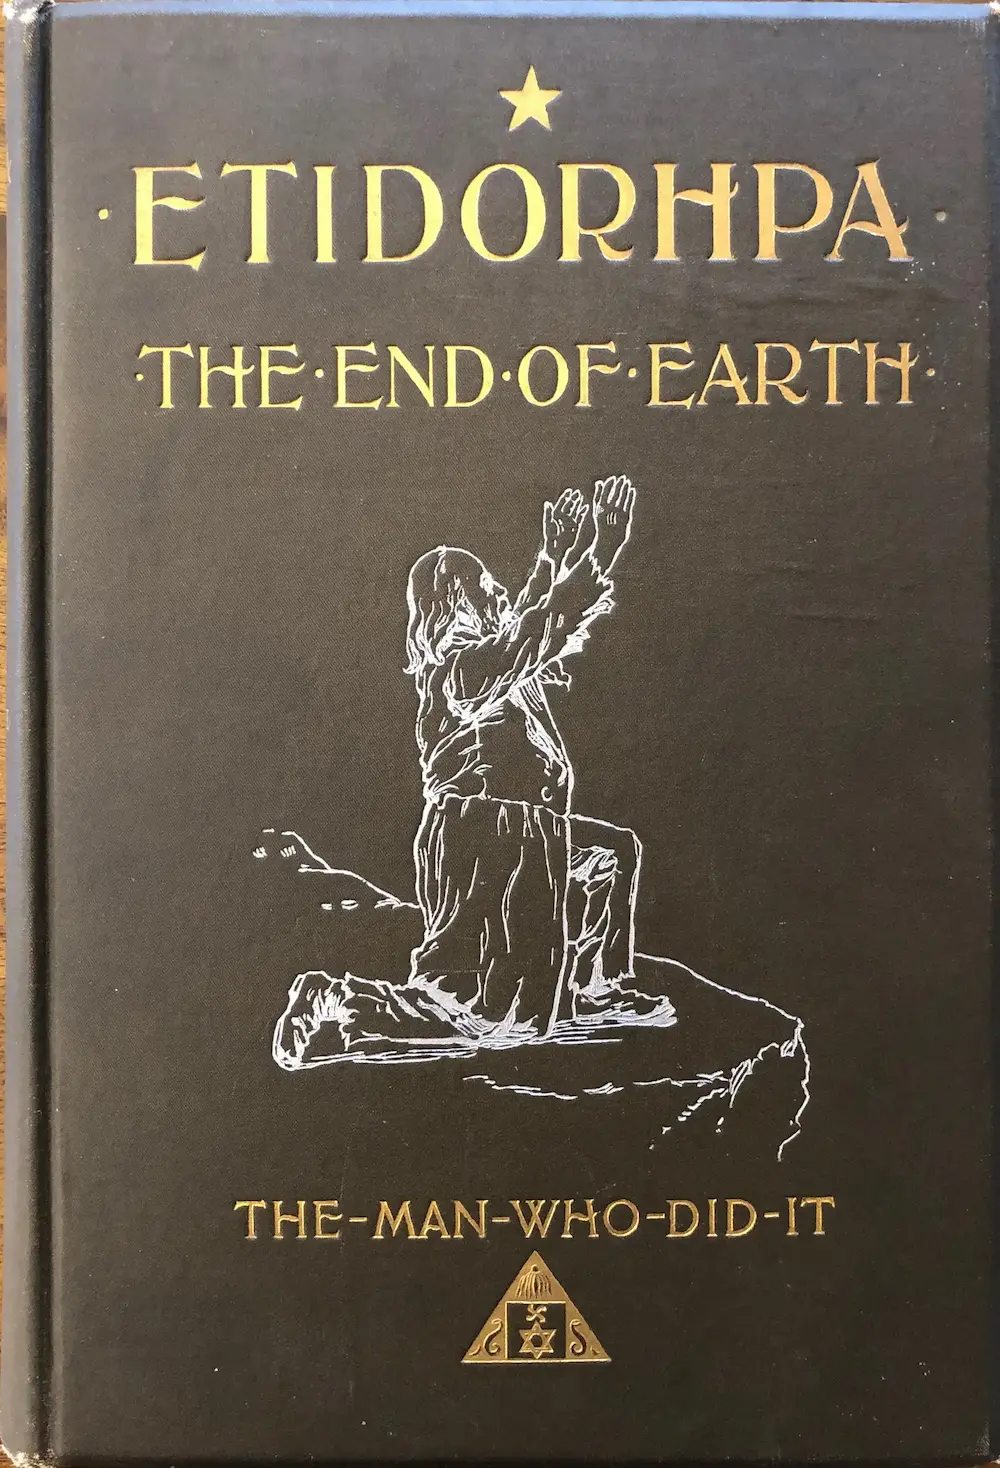 1895 edition of Etidorhpa, personal collection